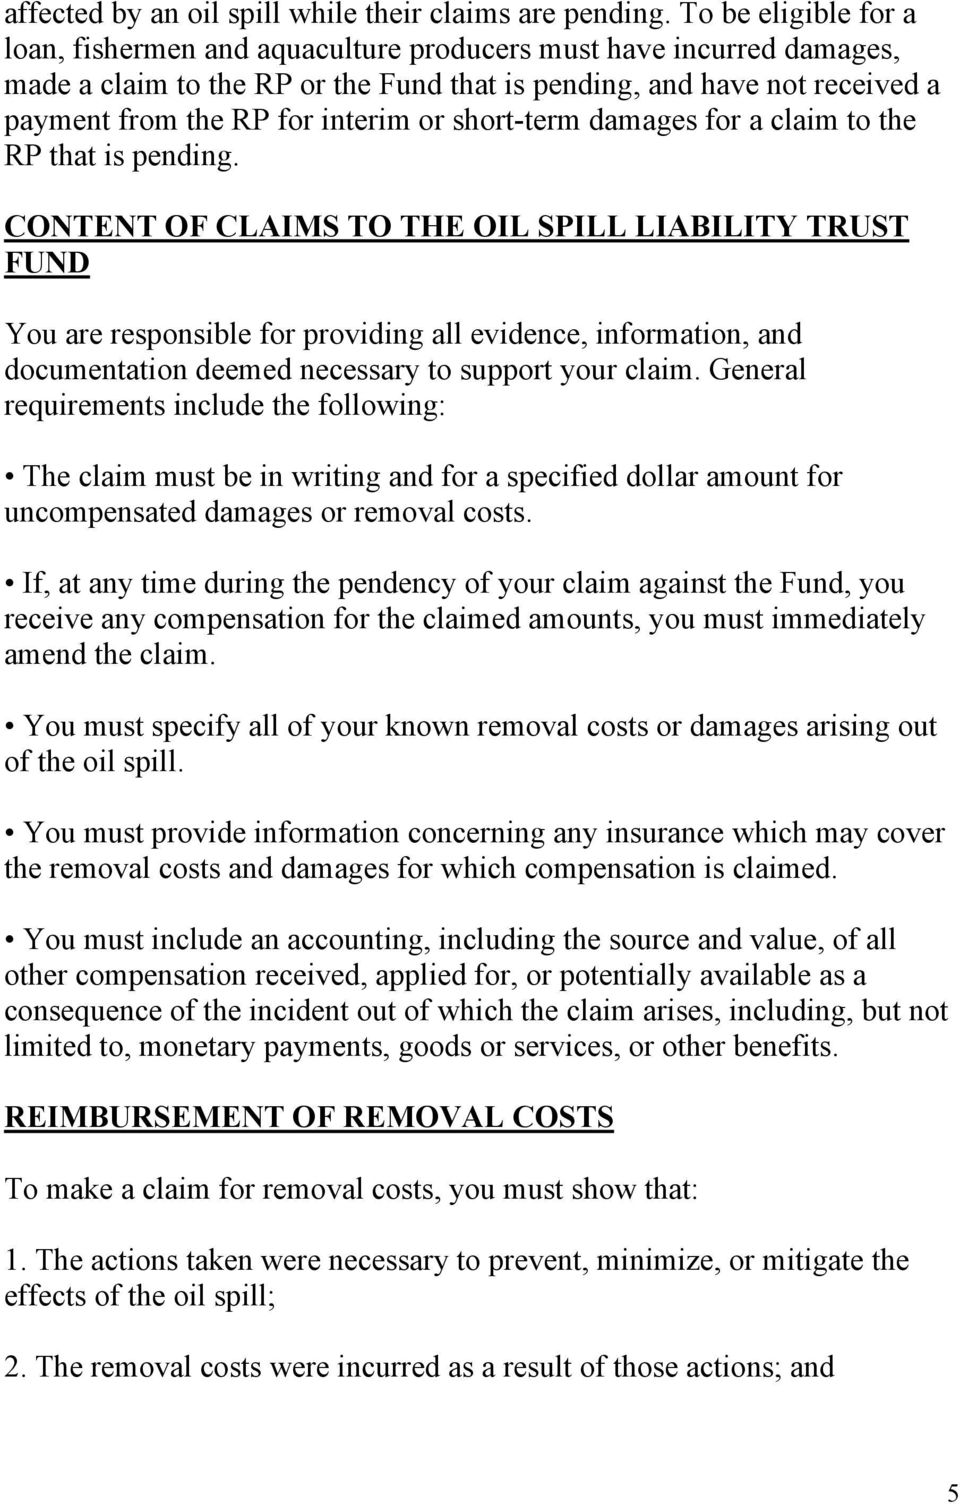 or short-term damages for a claim to the RP that is pending.